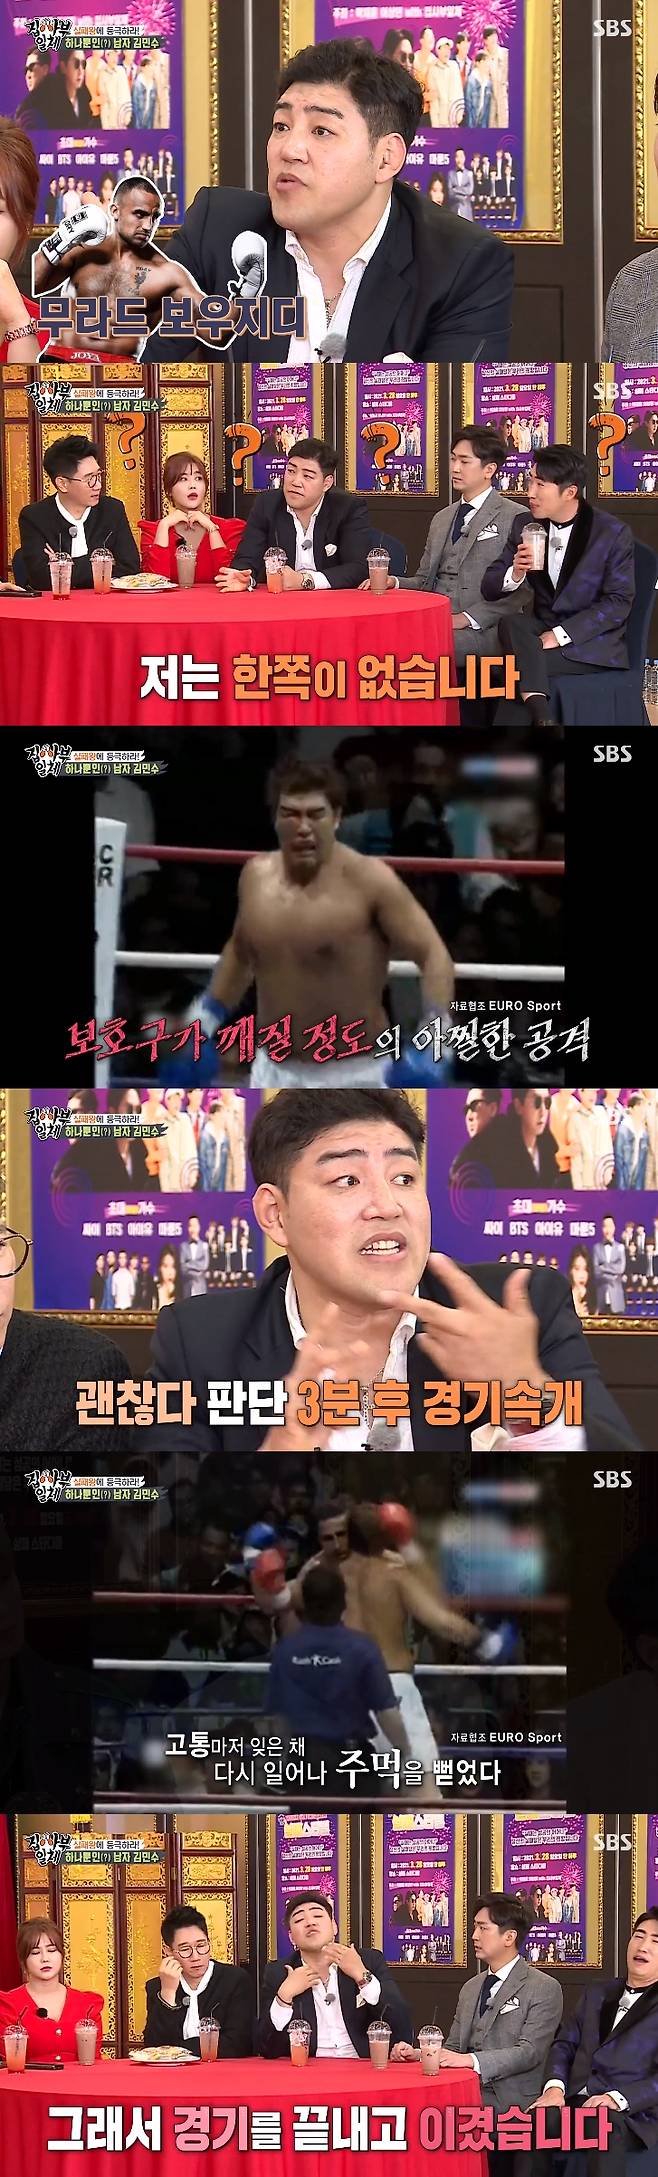 All The Butlers mixed martial arts player Kim Min-soo revealed his experience of fighting.SBS entertainment program All The Butlers broadcasted on the 28th was decorated with Failure Stival, and Ji Seok-jin, Lee Sang-min, Shim Soo-chang, Kim Min-soo, Jang Dong-min and Solbi were also included.Kim Min-soo said, I do not have a testicle.I was hit very hard in the fourth round, he said, adding that Murad Bowjidi and the plastic foul cup (guard) of the second round Kyonggi were so priced that they were broken.I was so sick, but I was feverish. The doctor checked and decided that it was okay, so I resumed Kyonggi three minutes later. I did not even know it was sick.Kim Min-soo, who had endured the pain with his commitment, eventually won the applause by revealing that he had won this Kyonggi.Meanwhile, All The Butlers is broadcast every Sunday at 6:25 pm.photoSBS broadcast screen